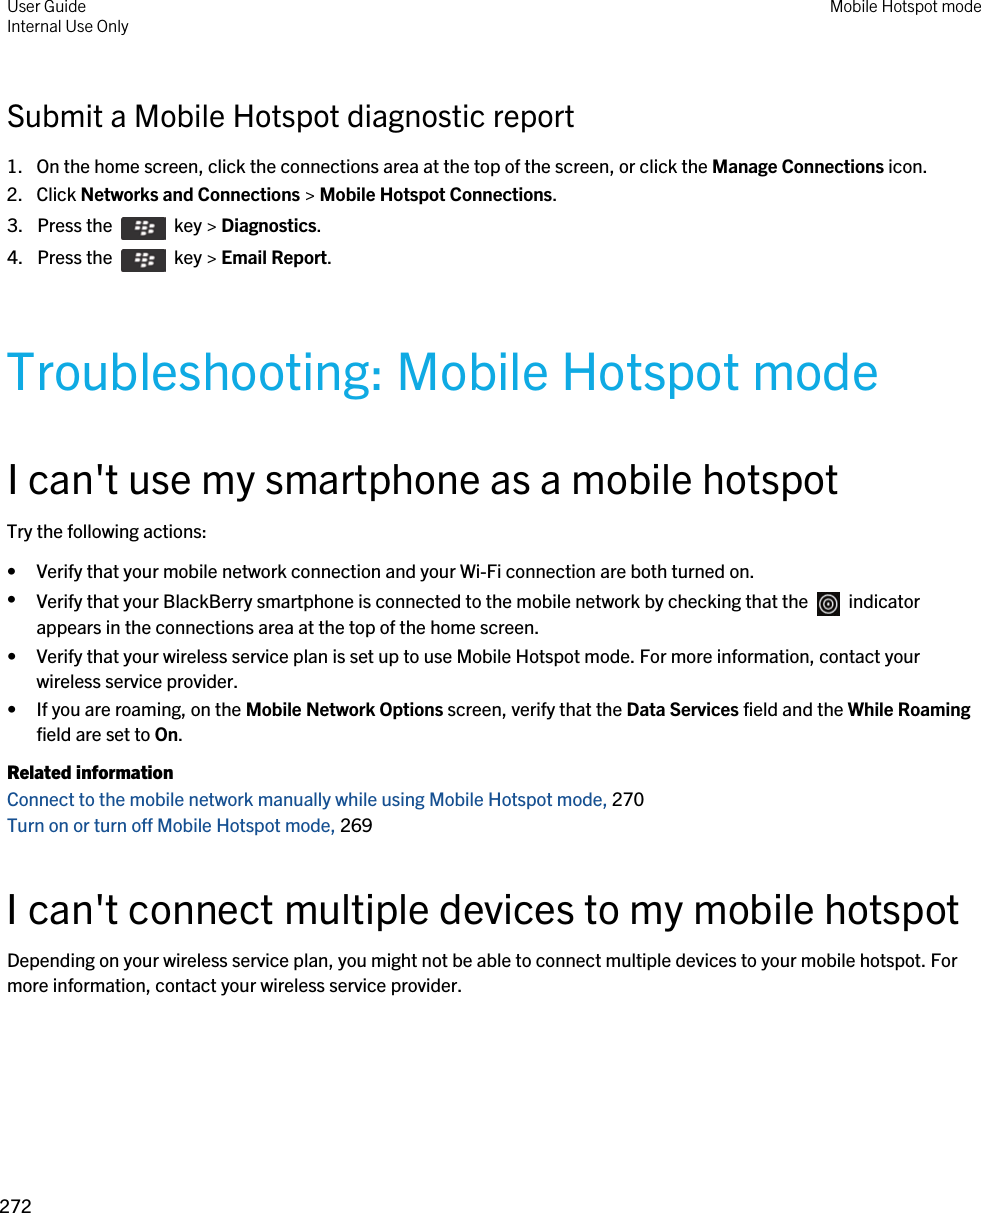 Submit a Mobile Hotspot diagnostic report1. On the home screen, click the connections area at the top of the screen, or click the Manage Connections icon.2. Click Networks and Connections &gt; Mobile Hotspot Connections.3.  Press the    key &gt; Diagnostics.4.  Press the    key &gt; Email Report.Troubleshooting: Mobile Hotspot modeI can&apos;t use my smartphone as a mobile hotspotTry the following actions:• Verify that your mobile network connection and your Wi-Fi connection are both turned on.•Verify that your BlackBerry smartphone is connected to the mobile network by checking that the    indicator appears in the connections area at the top of the home screen.• Verify that your wireless service plan is set up to use Mobile Hotspot mode. For more information, contact your wireless service provider.• If you are roaming, on the Mobile Network Options screen, verify that the Data Services field and the While Roaming field are set to On.Related informationConnect to the mobile network manually while using Mobile Hotspot mode, 270 Turn on or turn off Mobile Hotspot mode, 269 I can&apos;t connect multiple devices to my mobile hotspotDepending on your wireless service plan, you might not be able to connect multiple devices to your mobile hotspot. For more information, contact your wireless service provider.User GuideInternal Use Only Mobile Hotspot mode272 